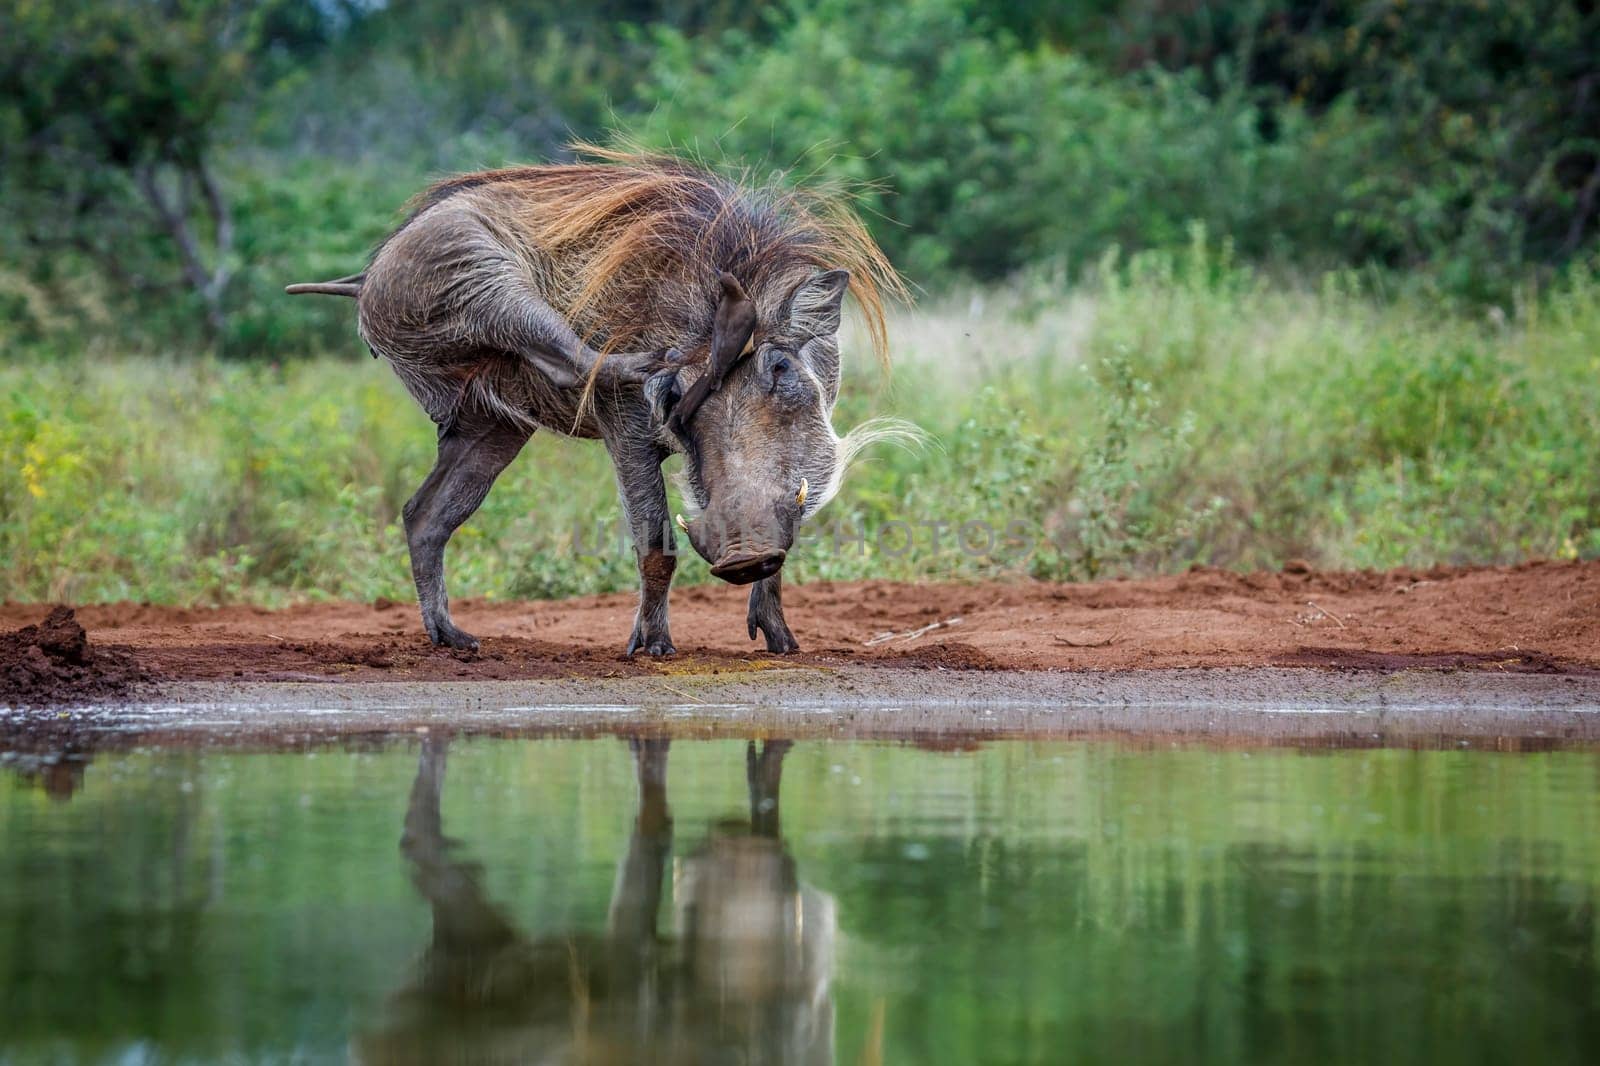 Common warthog in Kruger National park, South Africa by PACOCOMO